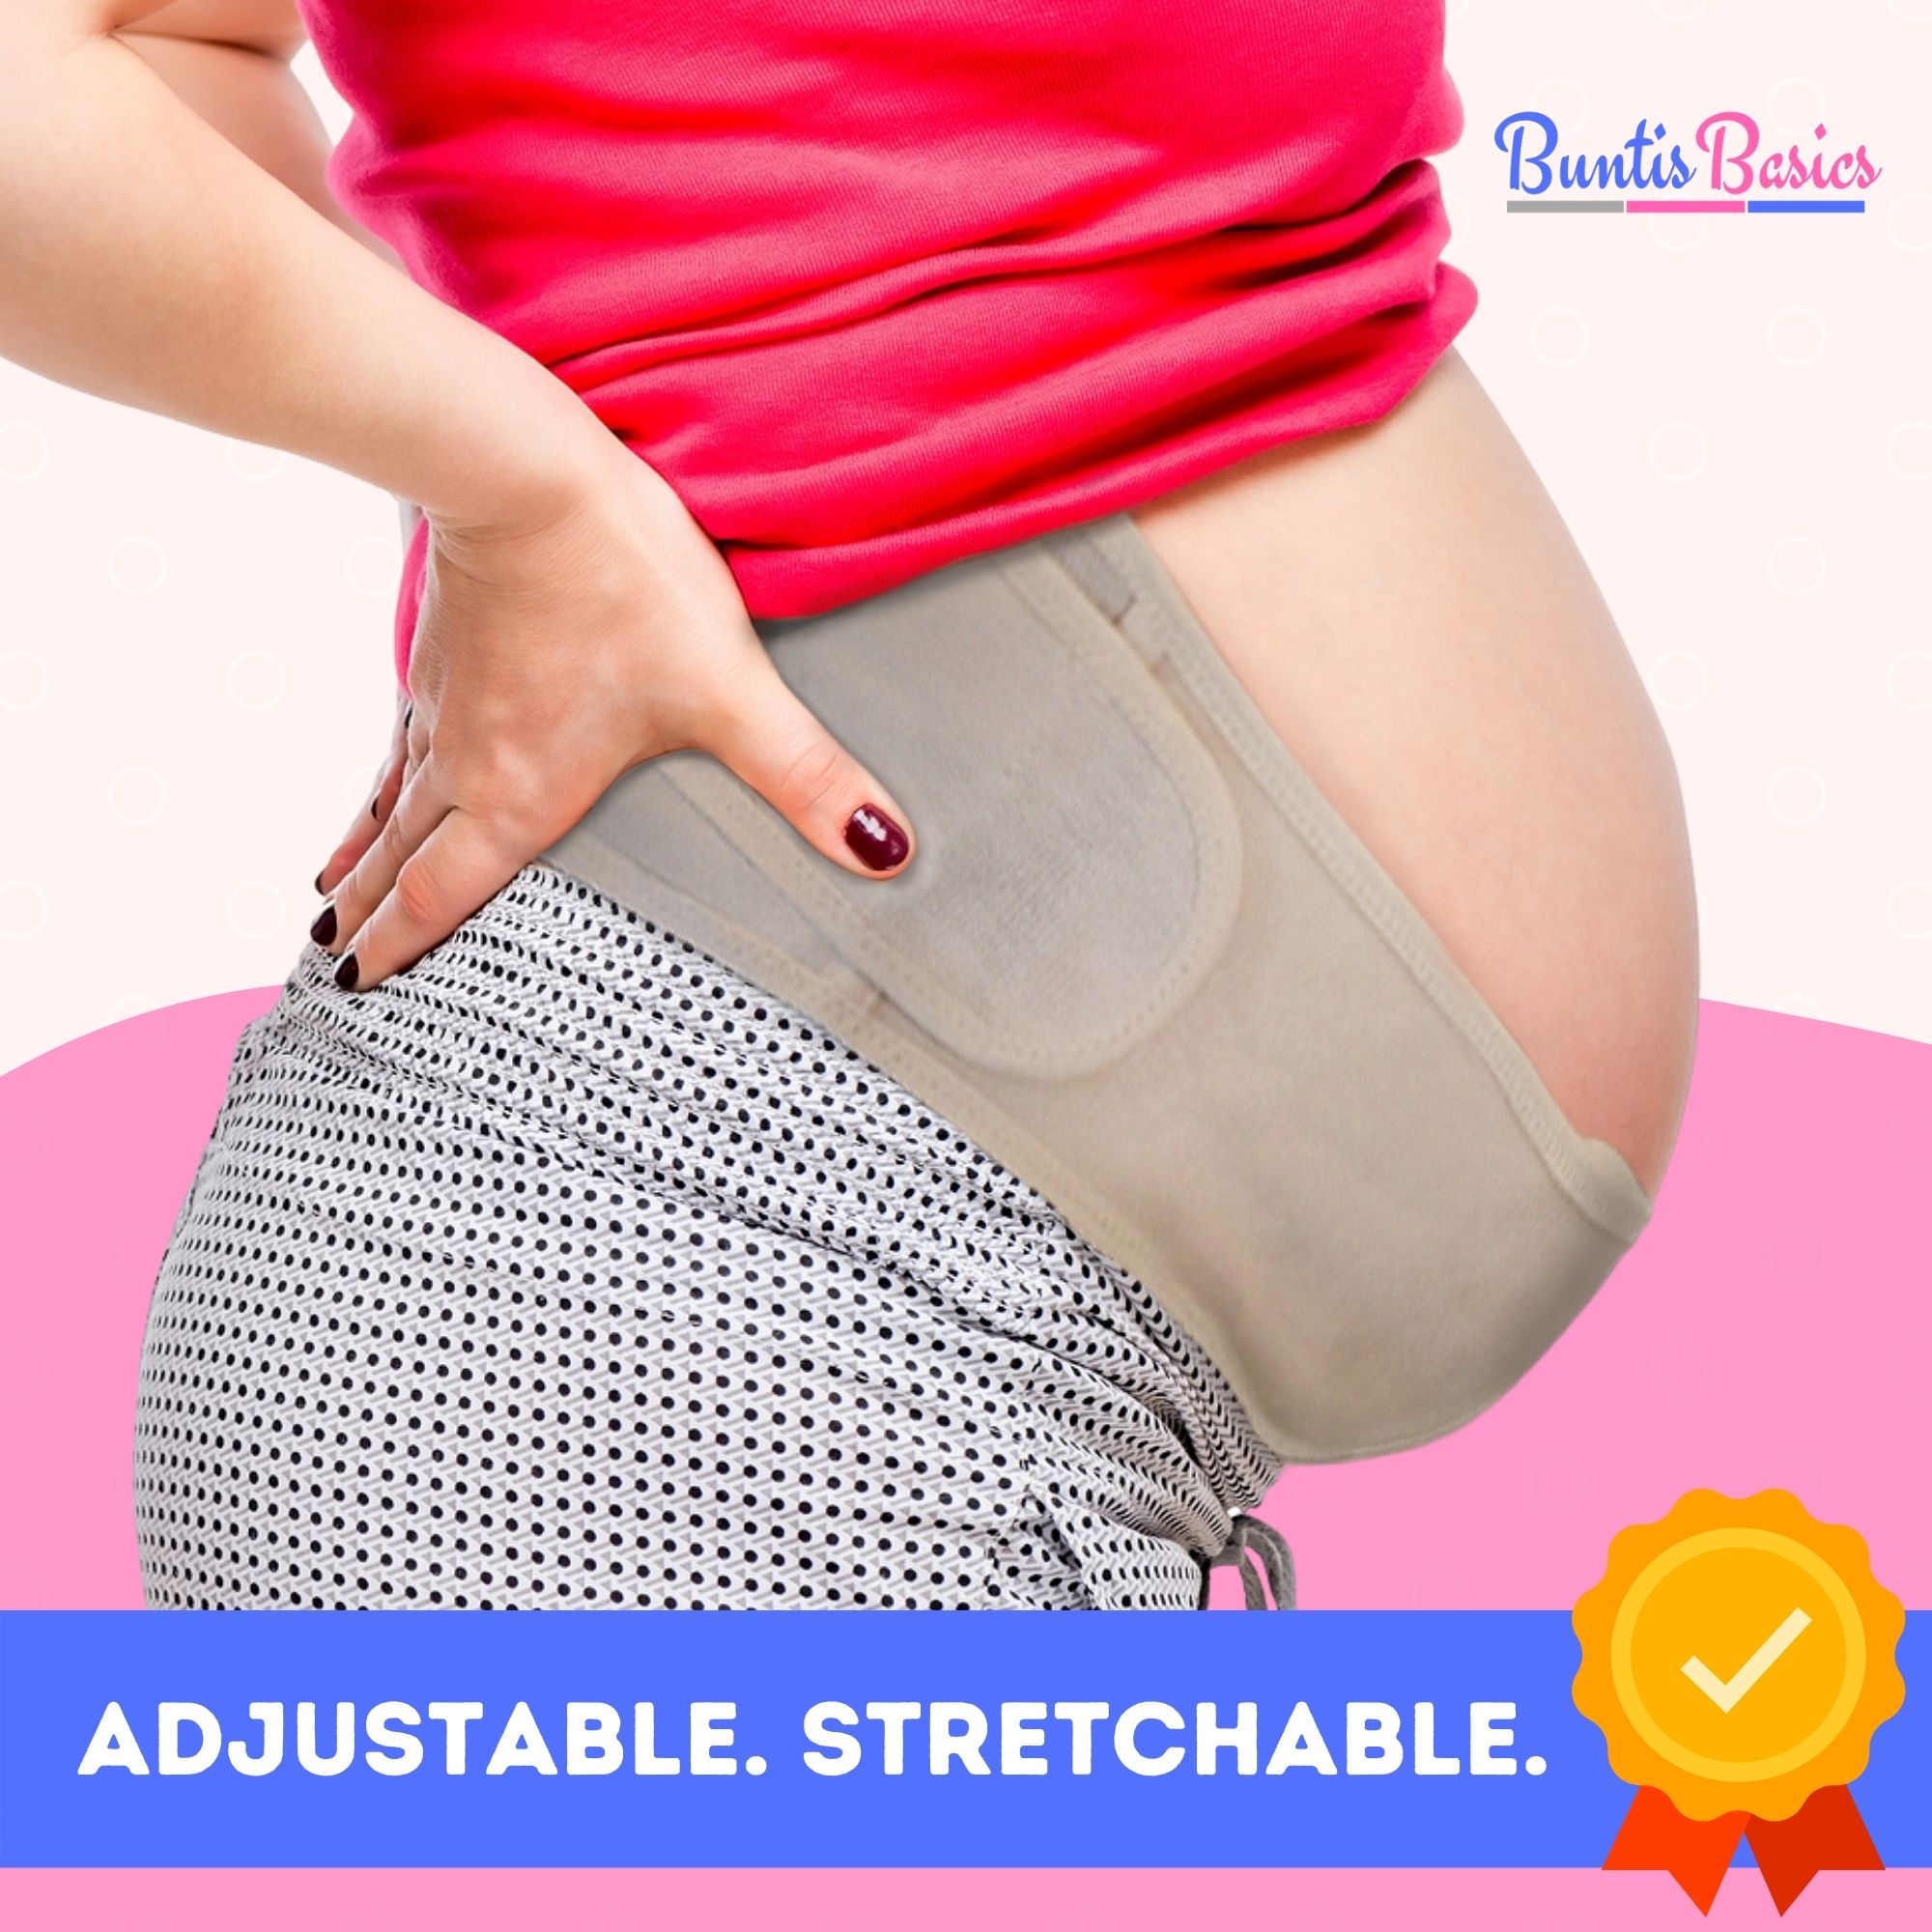  Belly Band for Pregnancy, Maternity Belt Support for Back,  Pelvic, Hip, Abdomen, Sciatica Pain Relief 2nd-3rd Trimester